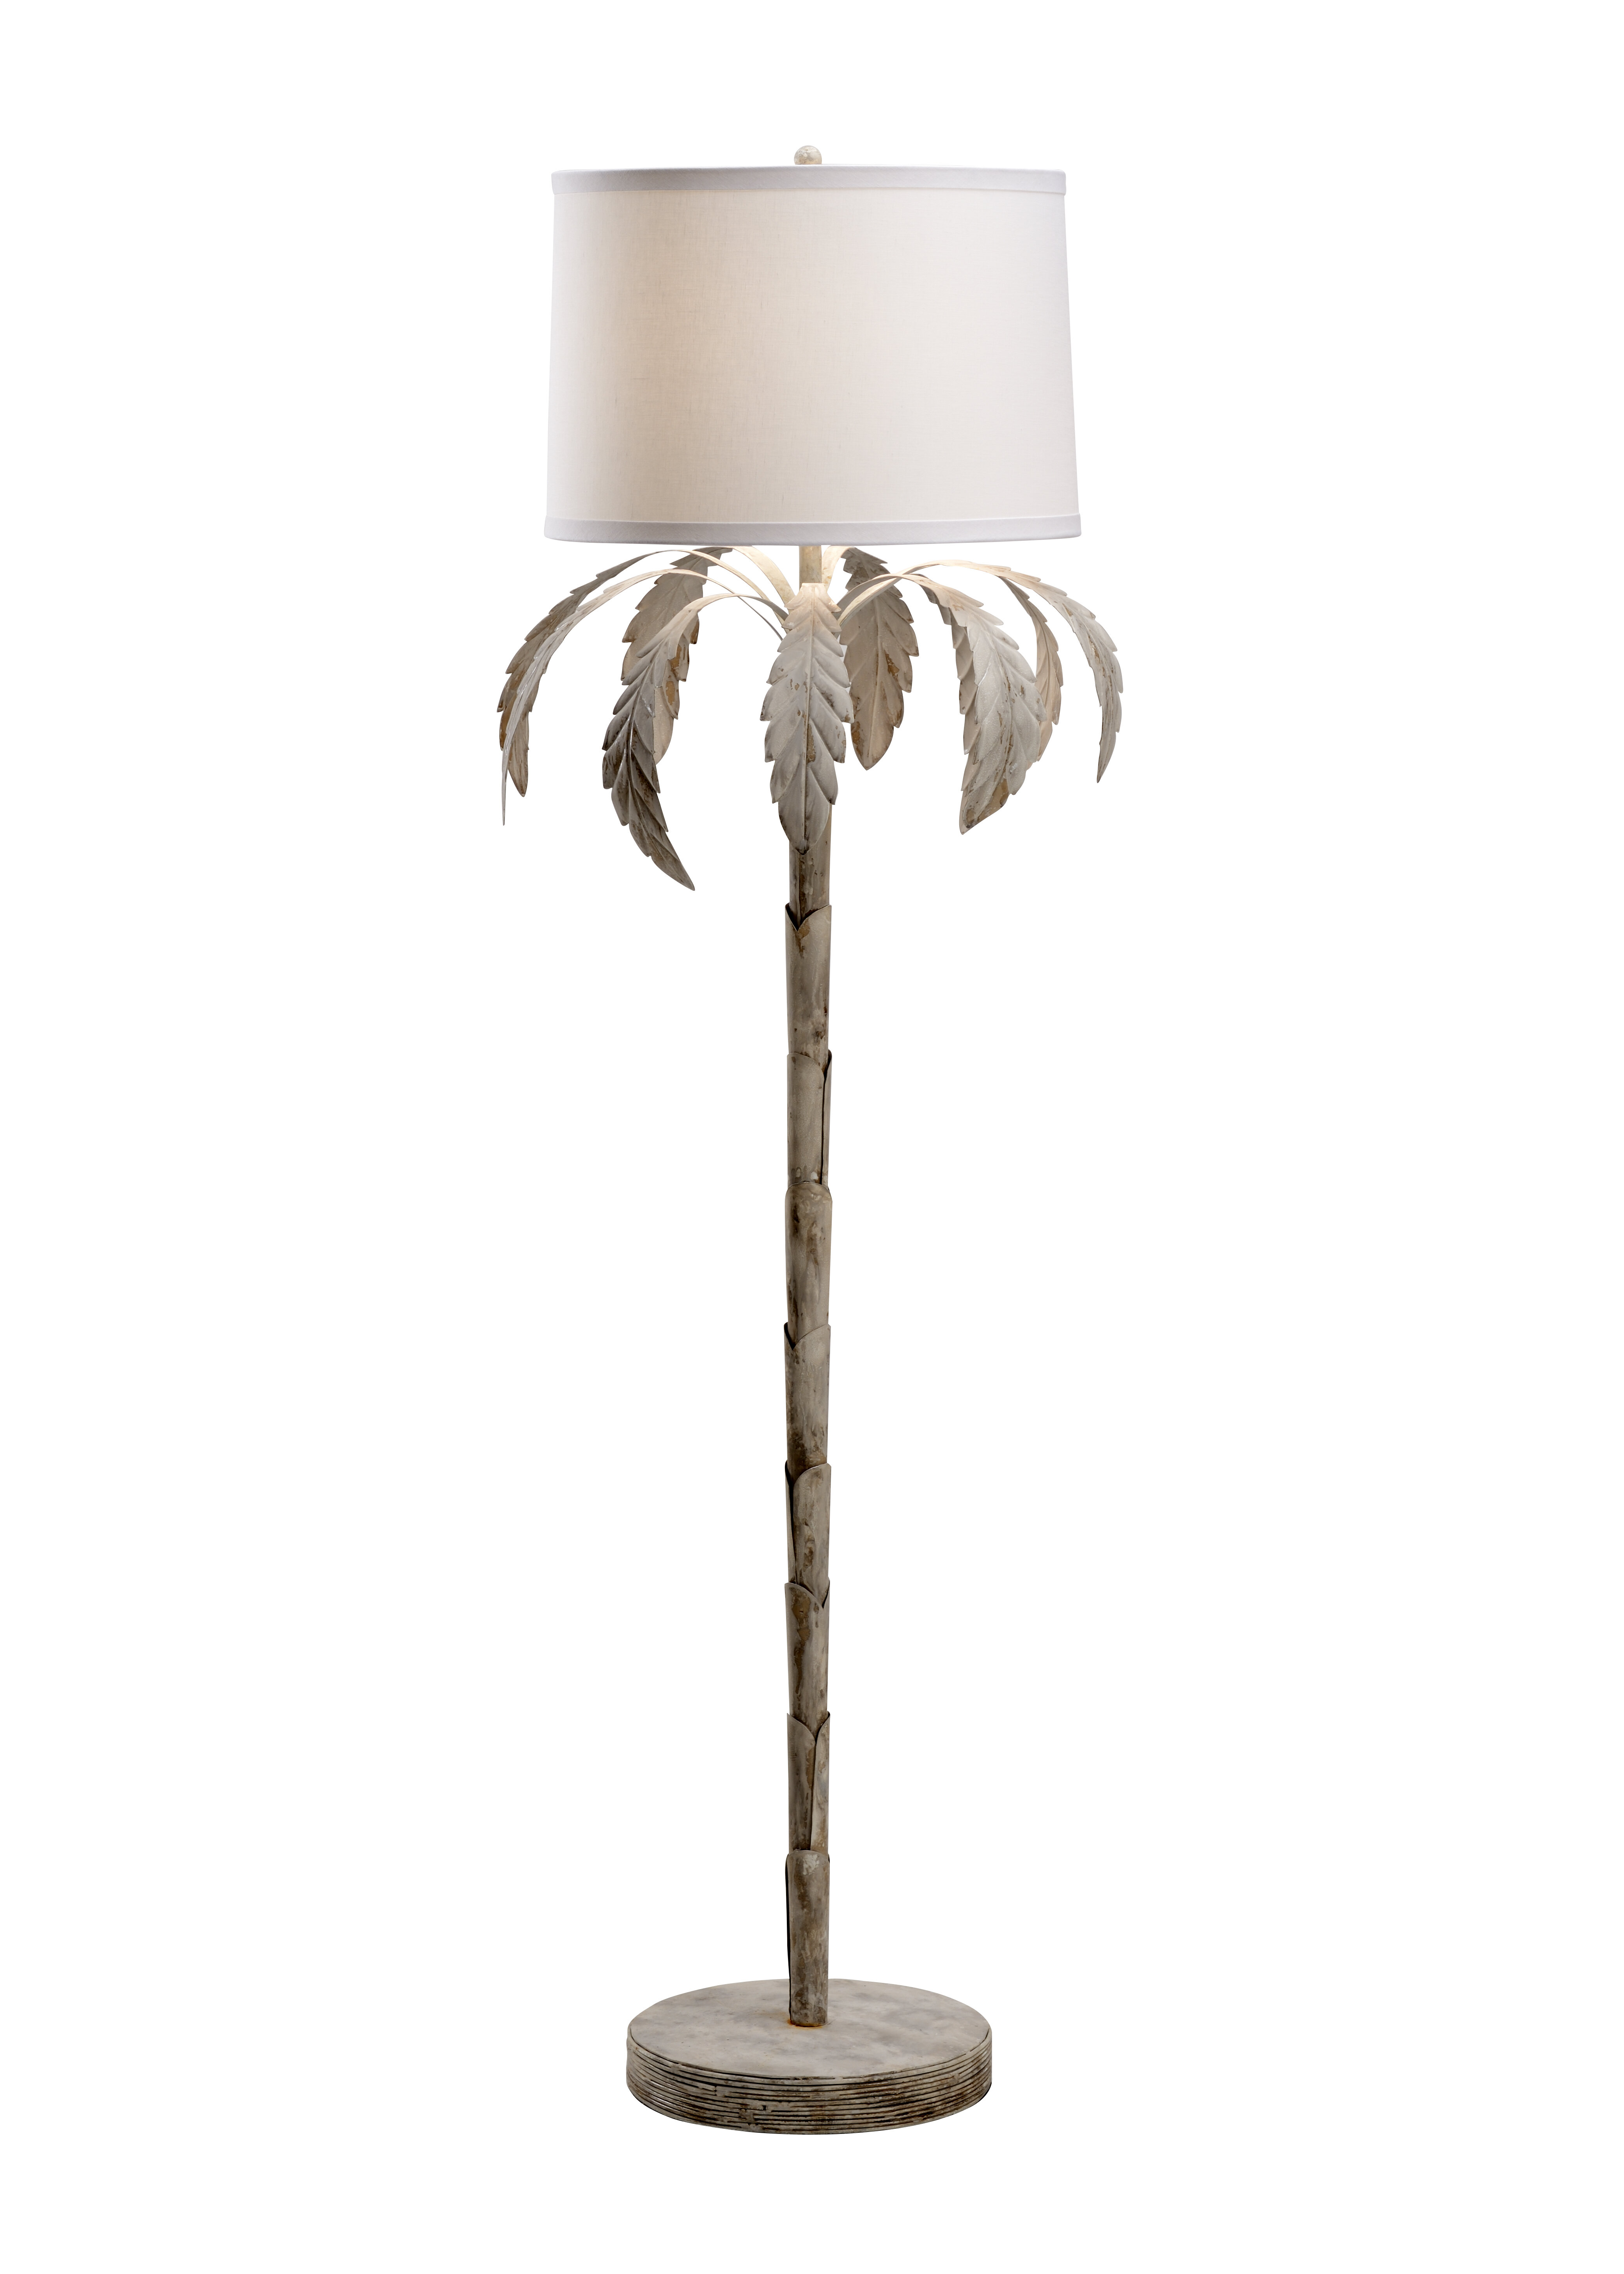 CHELSEA HOUSE Table and Floor Lamps Small Brass Ball Lamp 68881 -  Critelli's Furniture Rugs